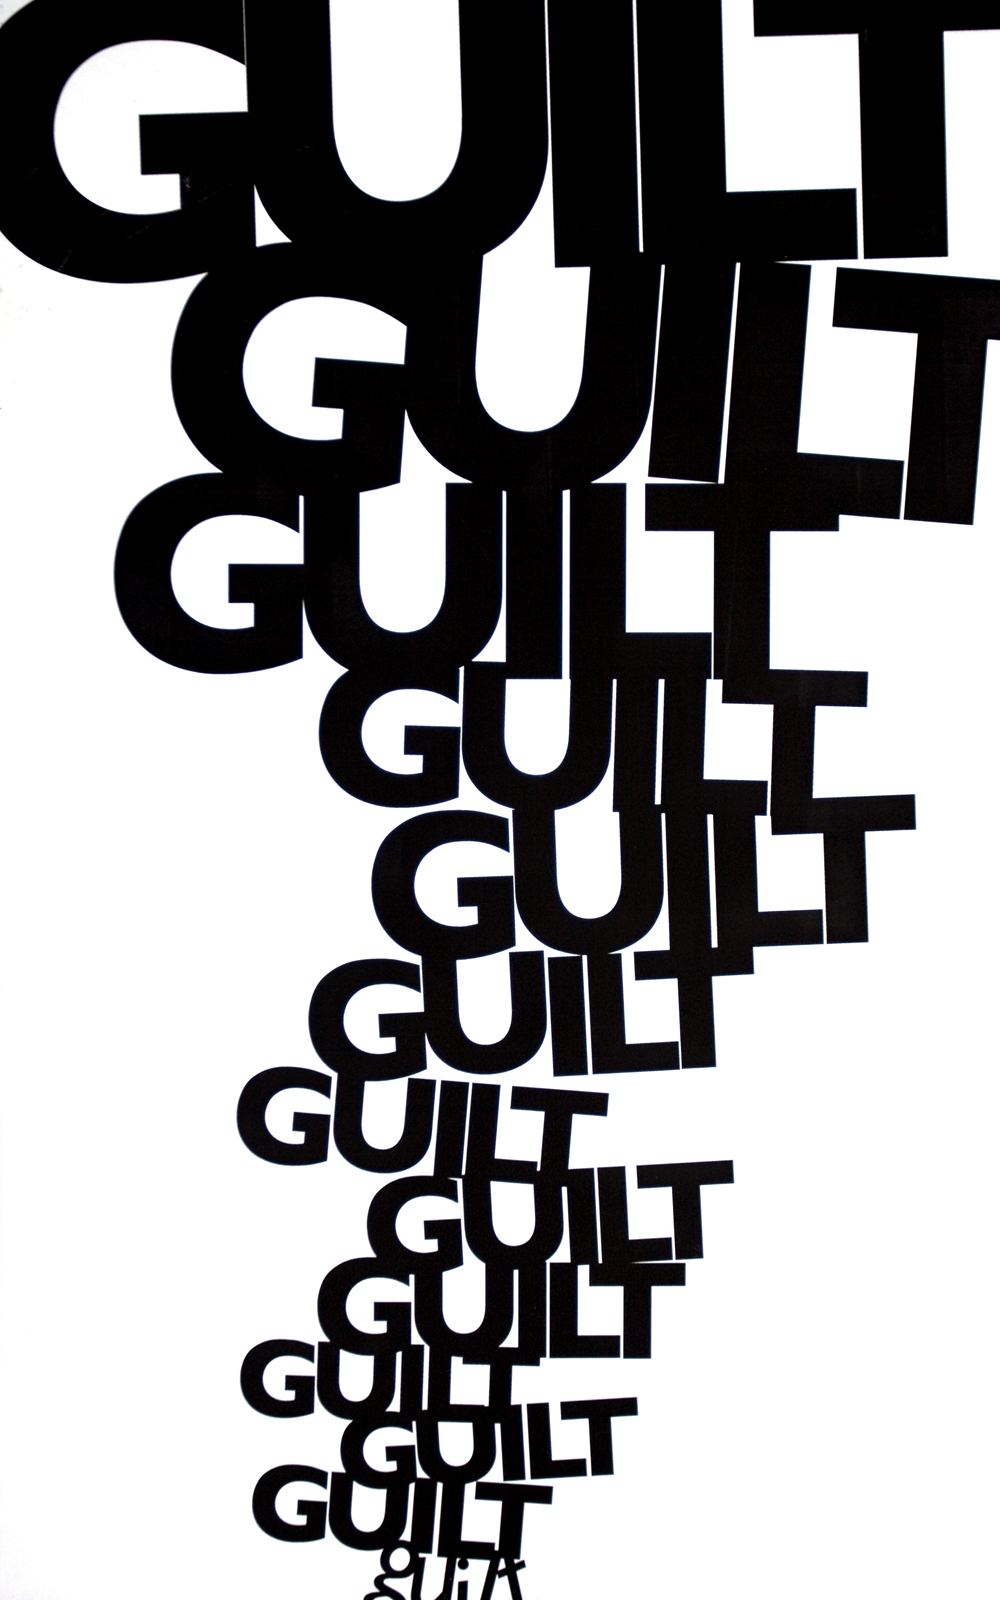 The word "guilt" appears in black on a white background many times. 